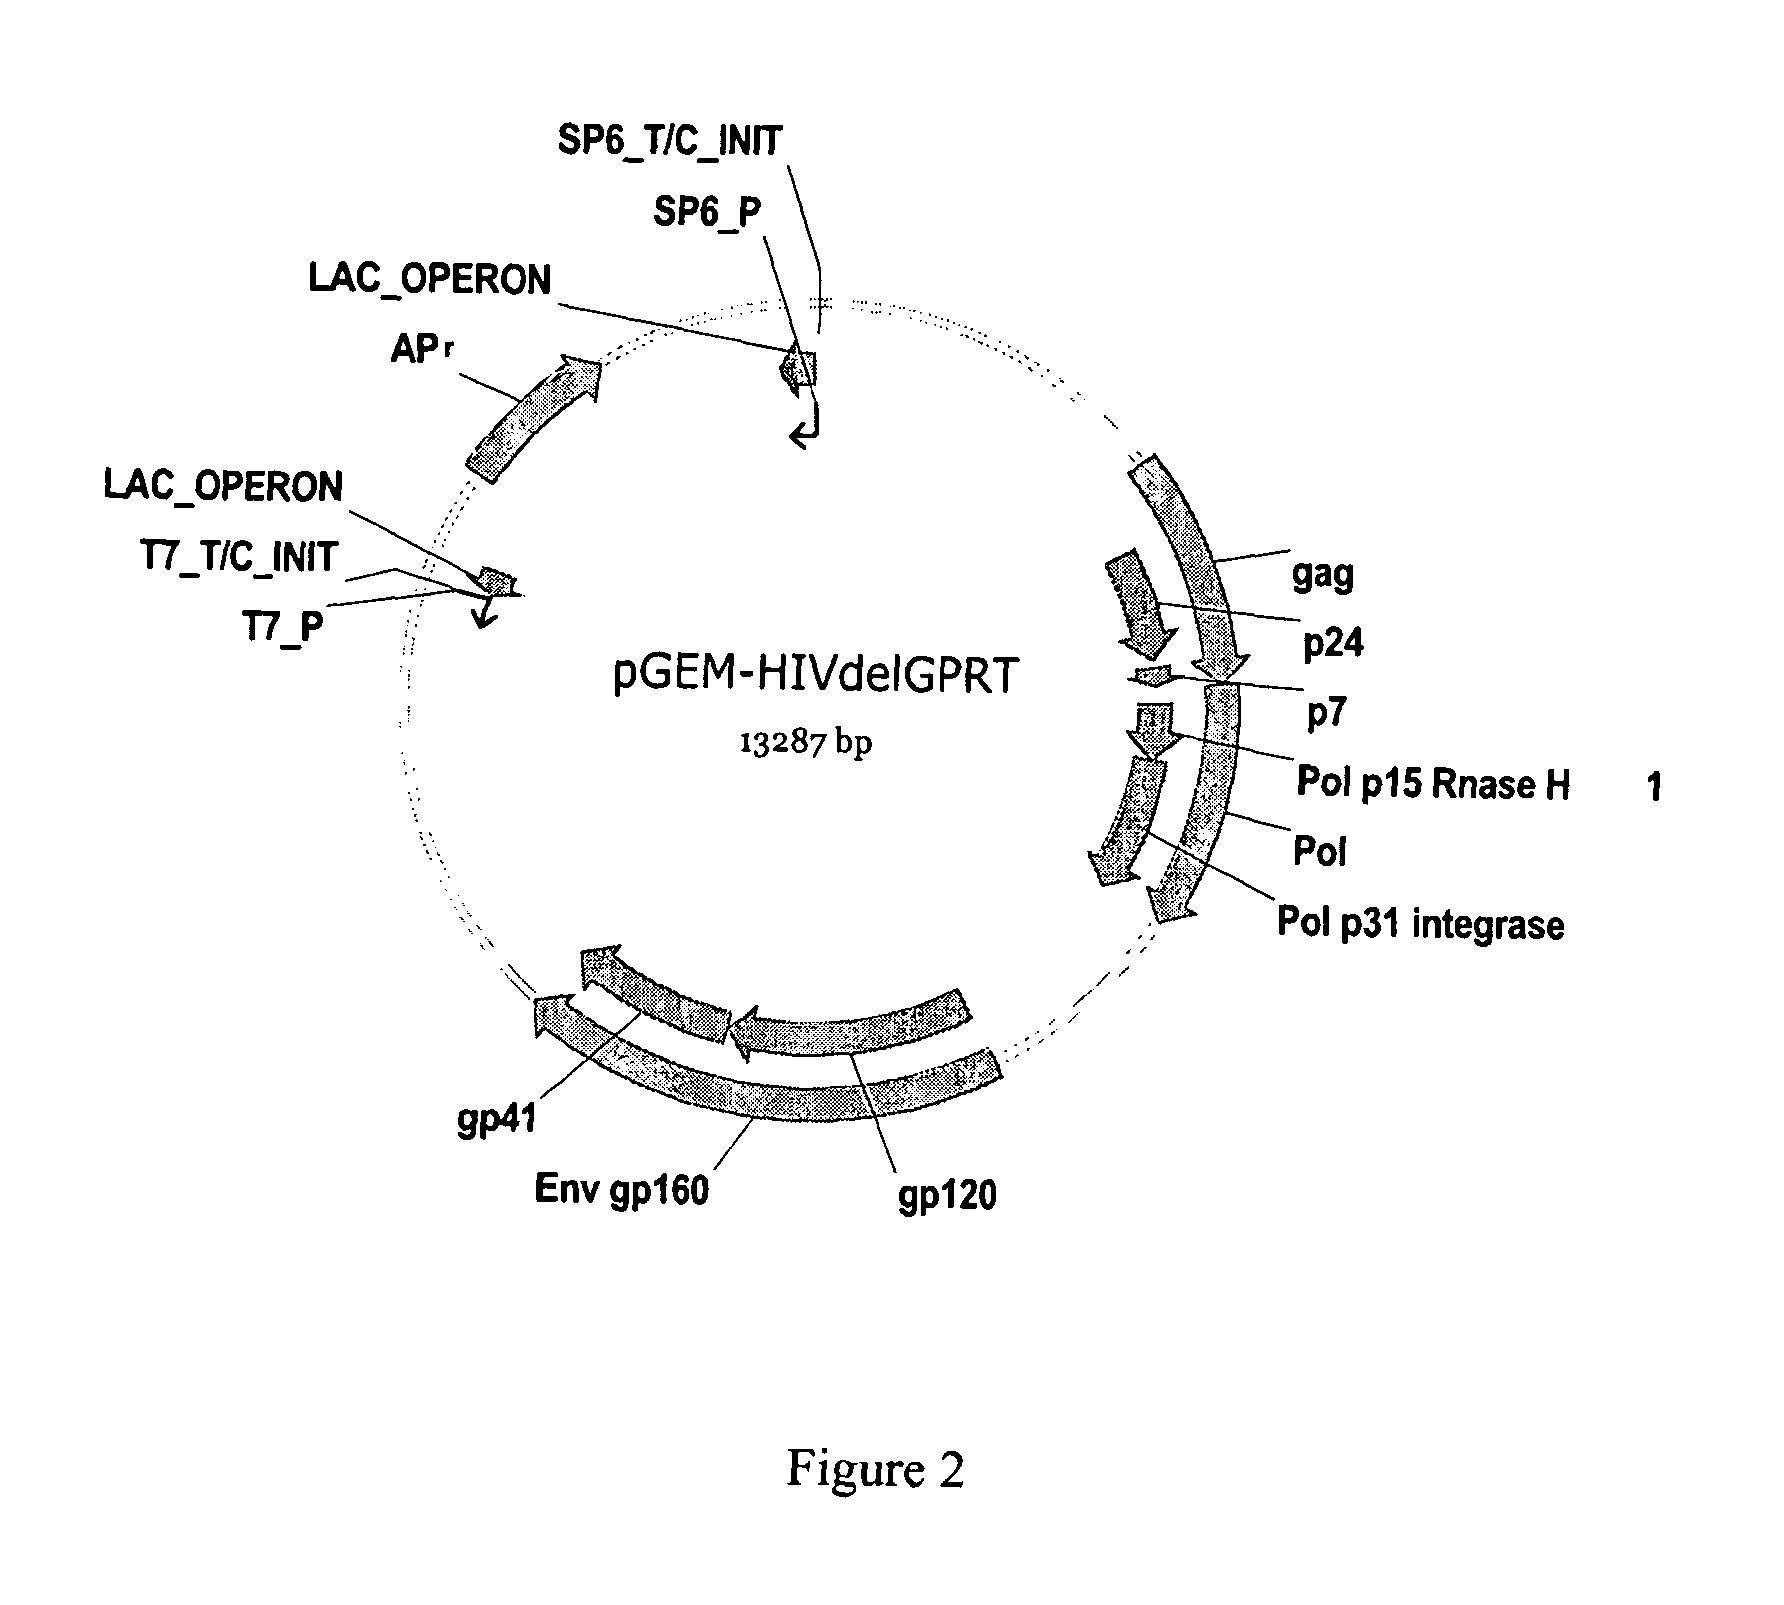 Methods, plasmid vectors and primers for assessing HIV viral fitness